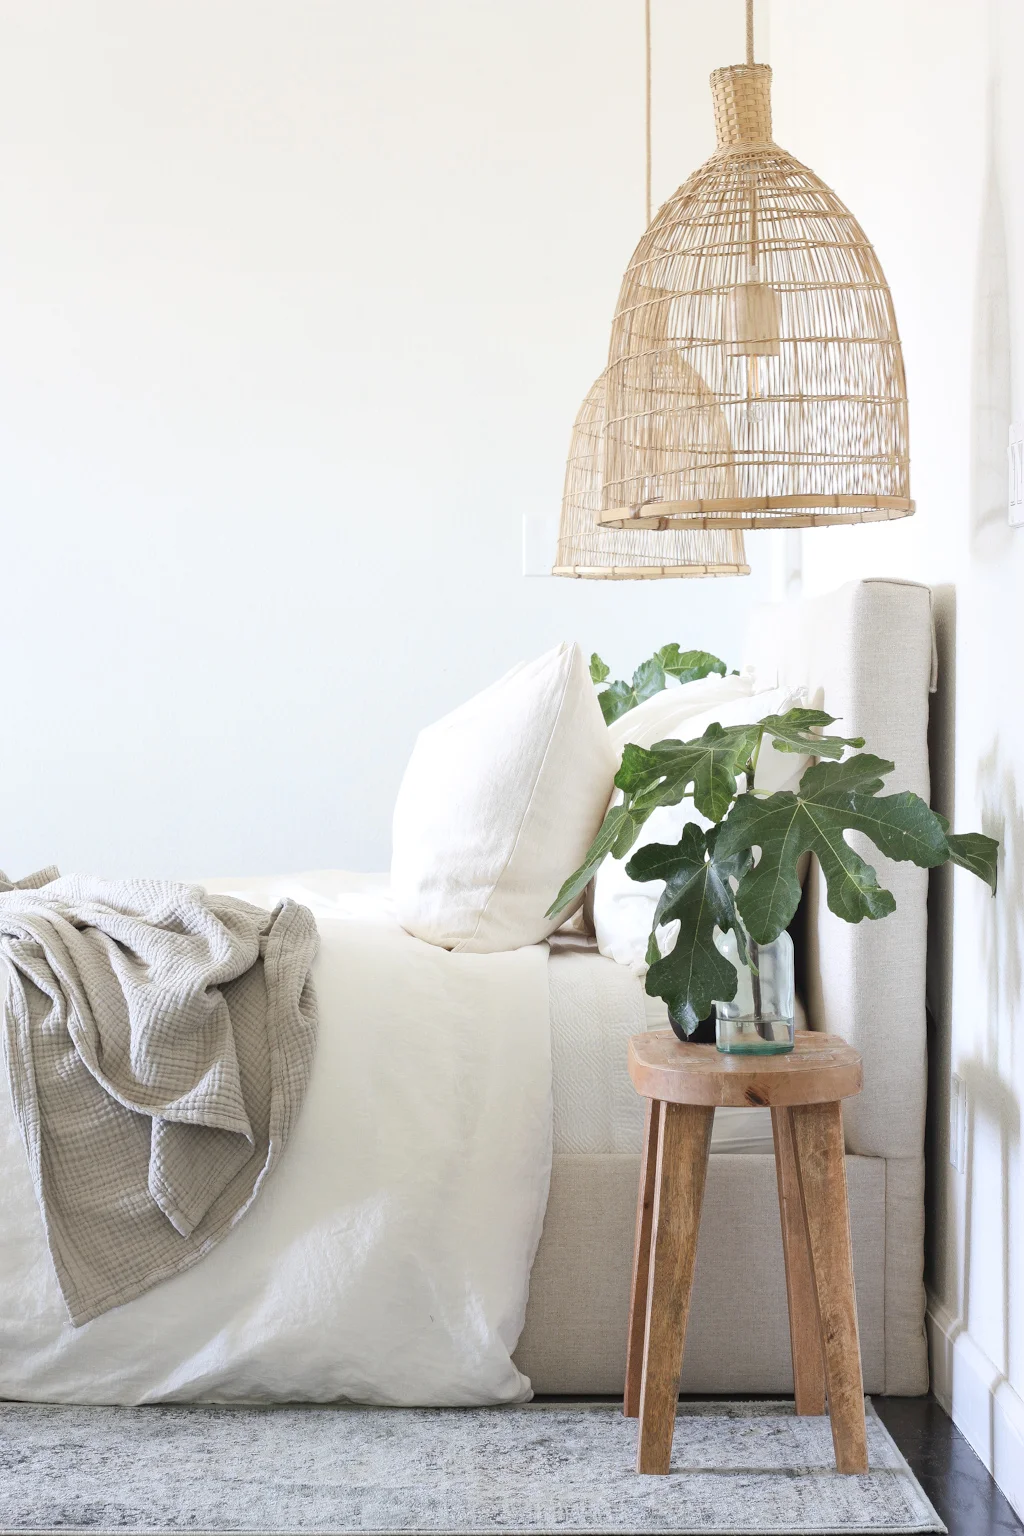 Guest bedroom decor cozy. Woven lights hang down on each side of the upholstered bed. Wooden nightstand with a vase full of greenery sit on top of the nightstand.